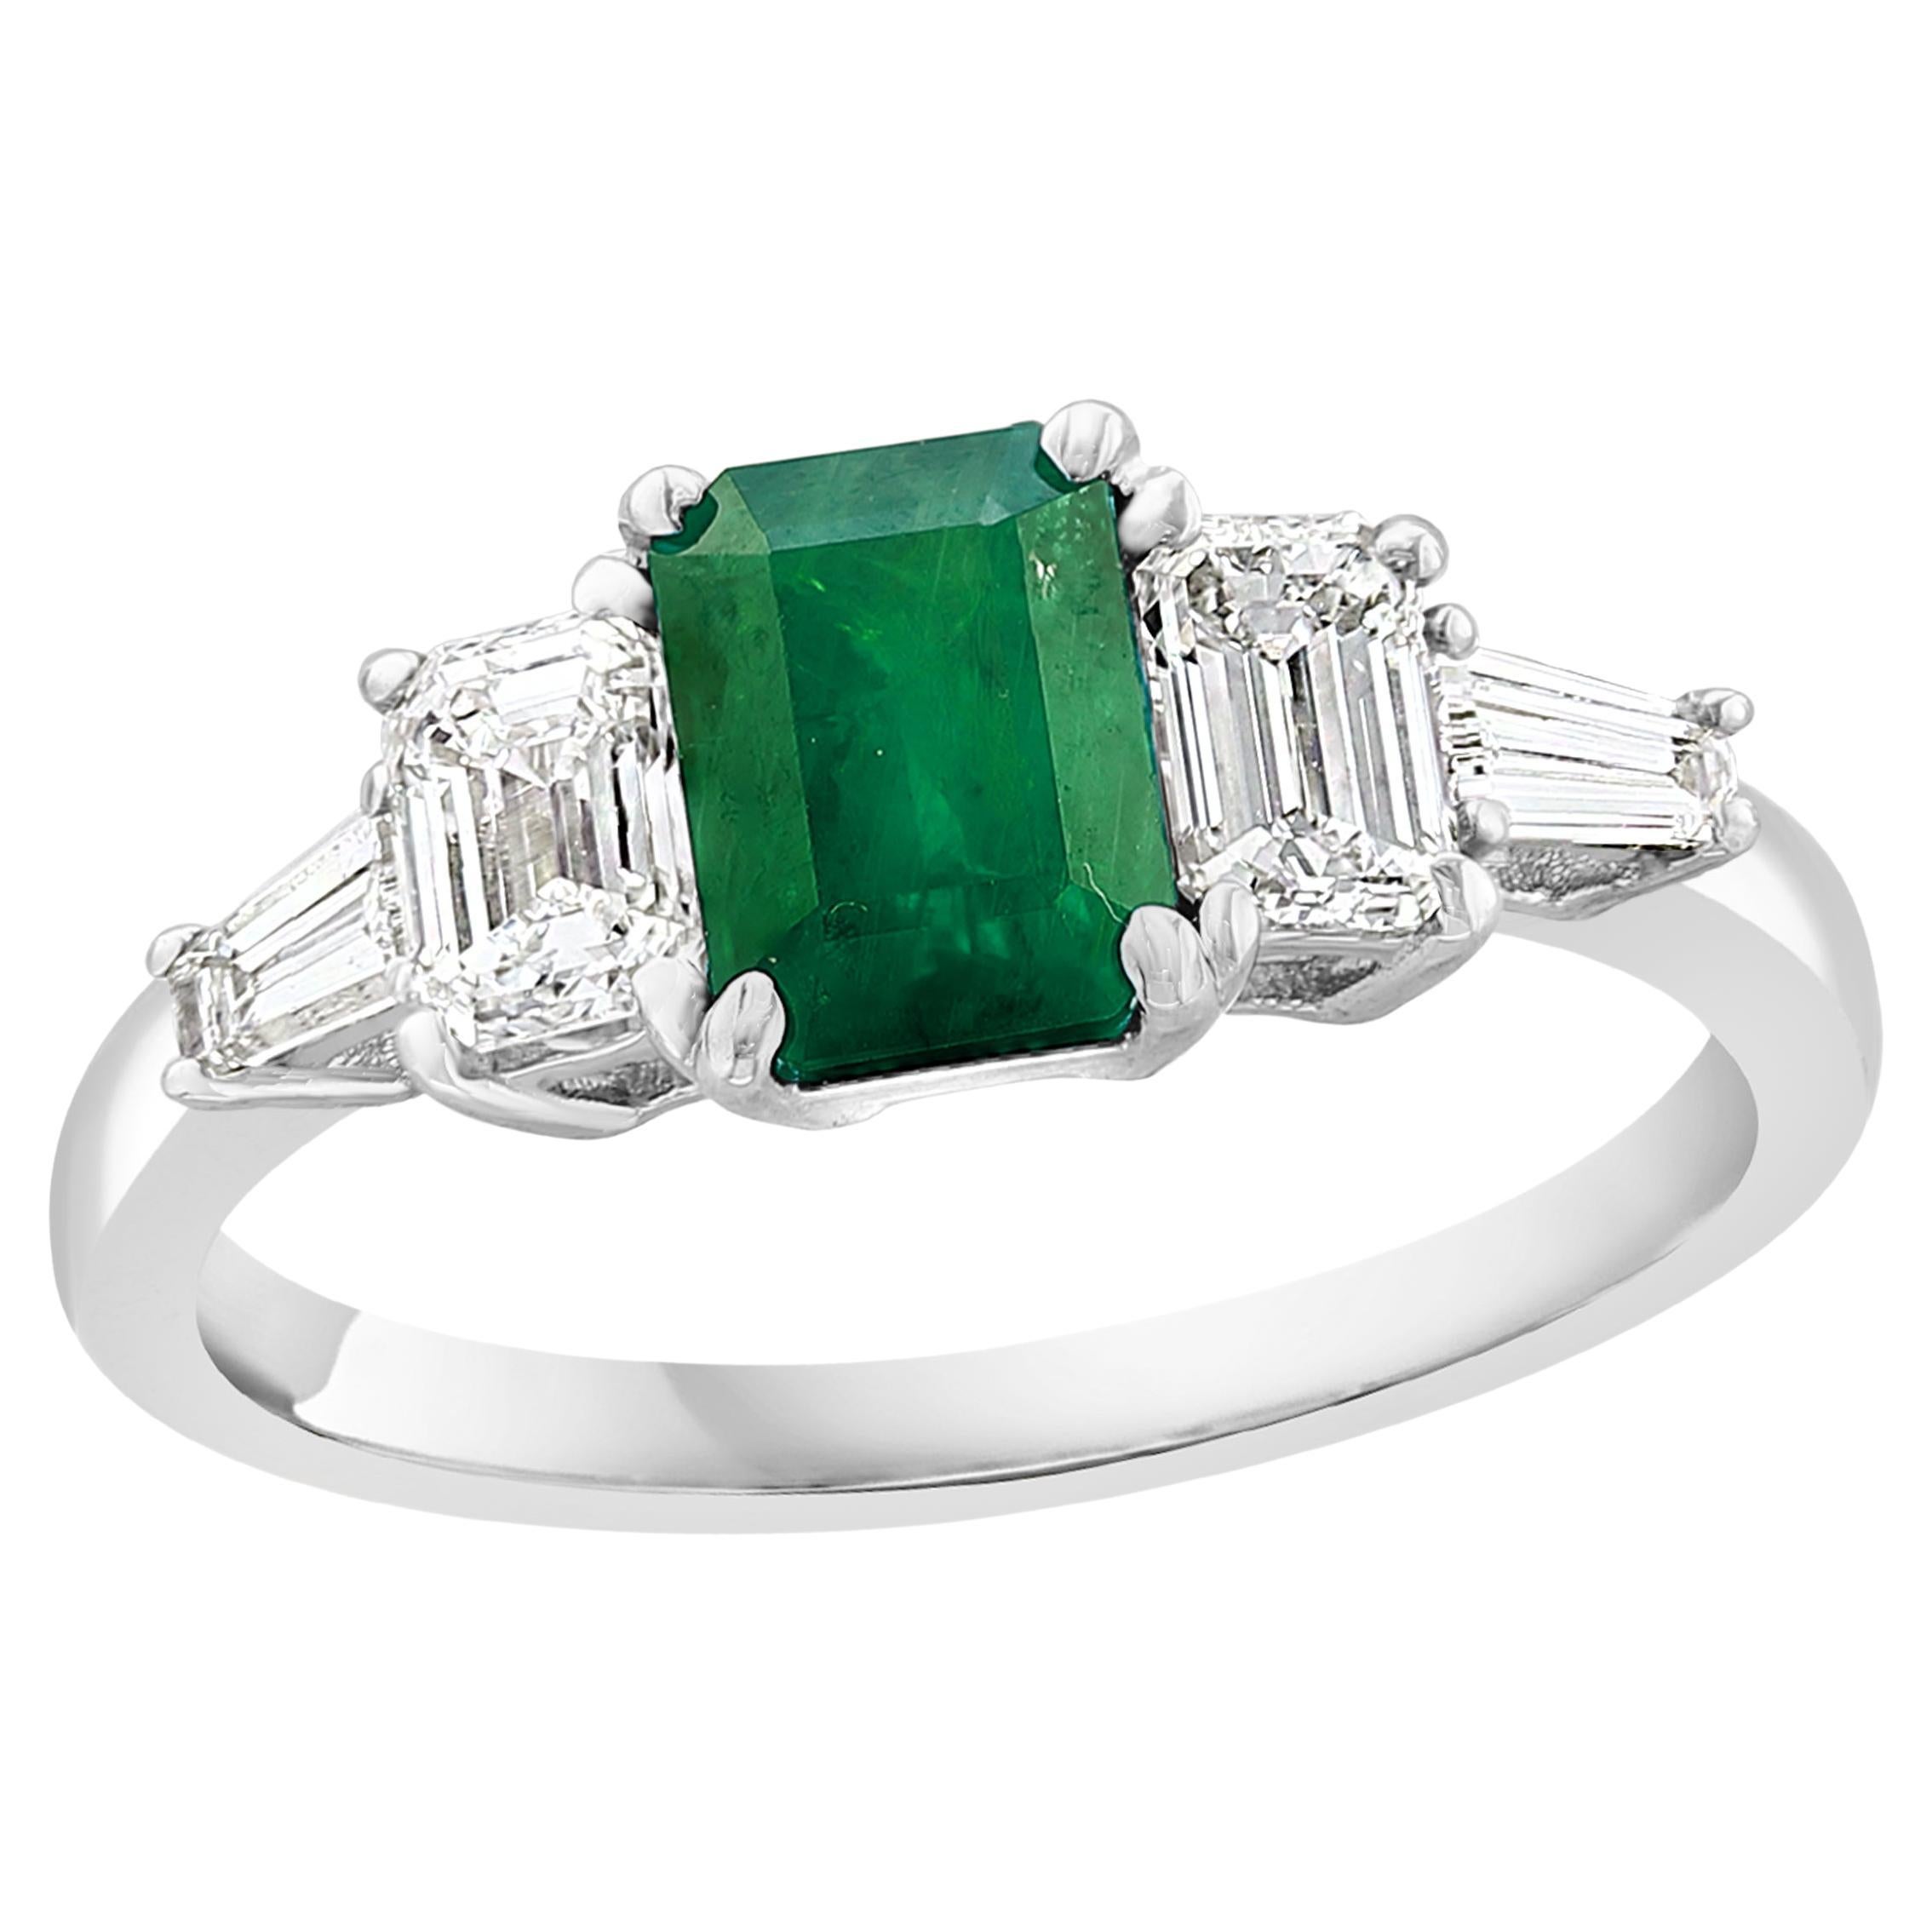 0.72 Carat Emerald Cut Emerald and Diamond 5 Stone Ring in 14K White Gold For Sale